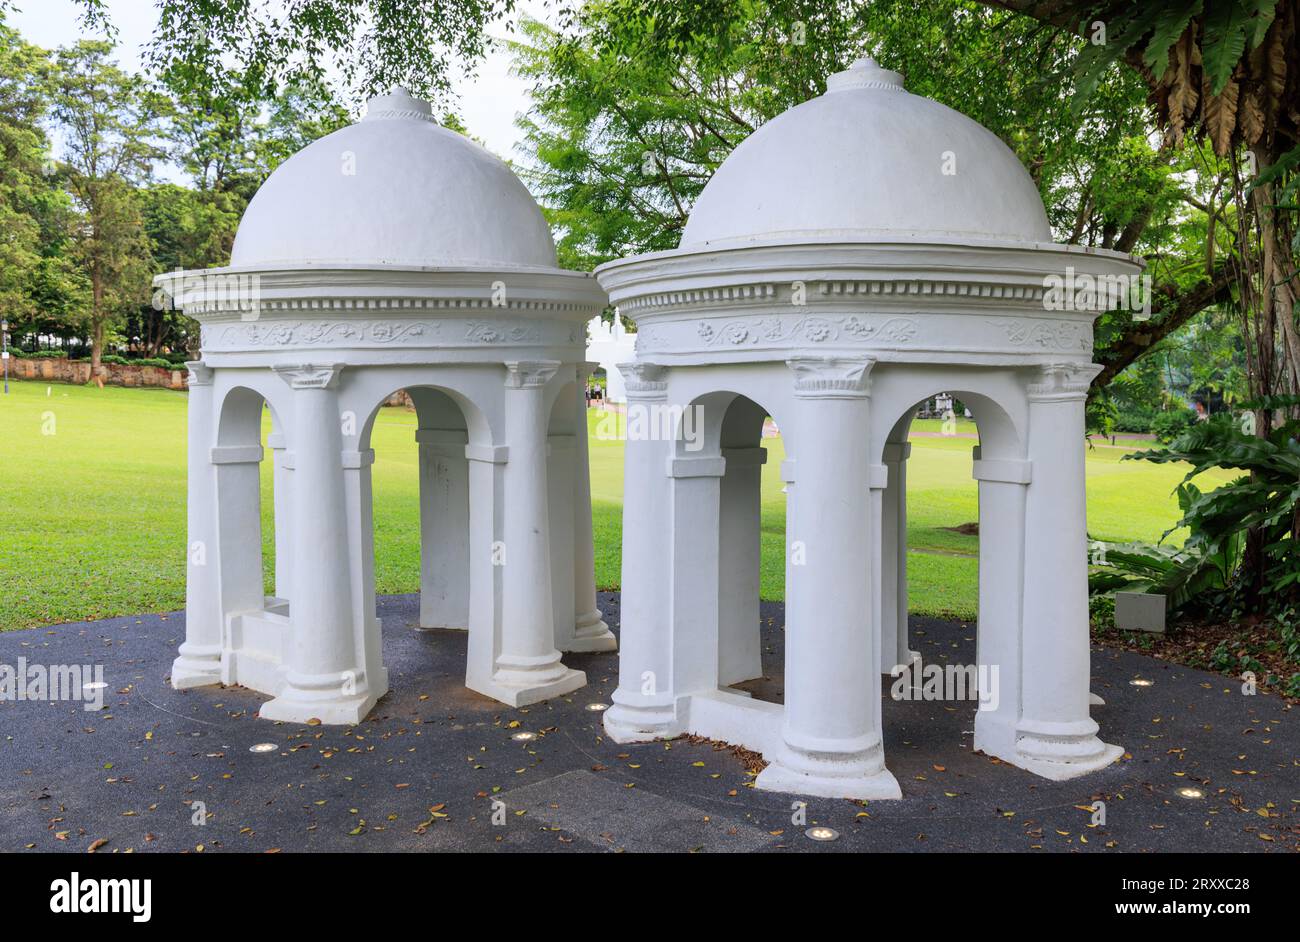 George Coleman's Cupolas at Fort Canning Park, Singapore Stock Photo